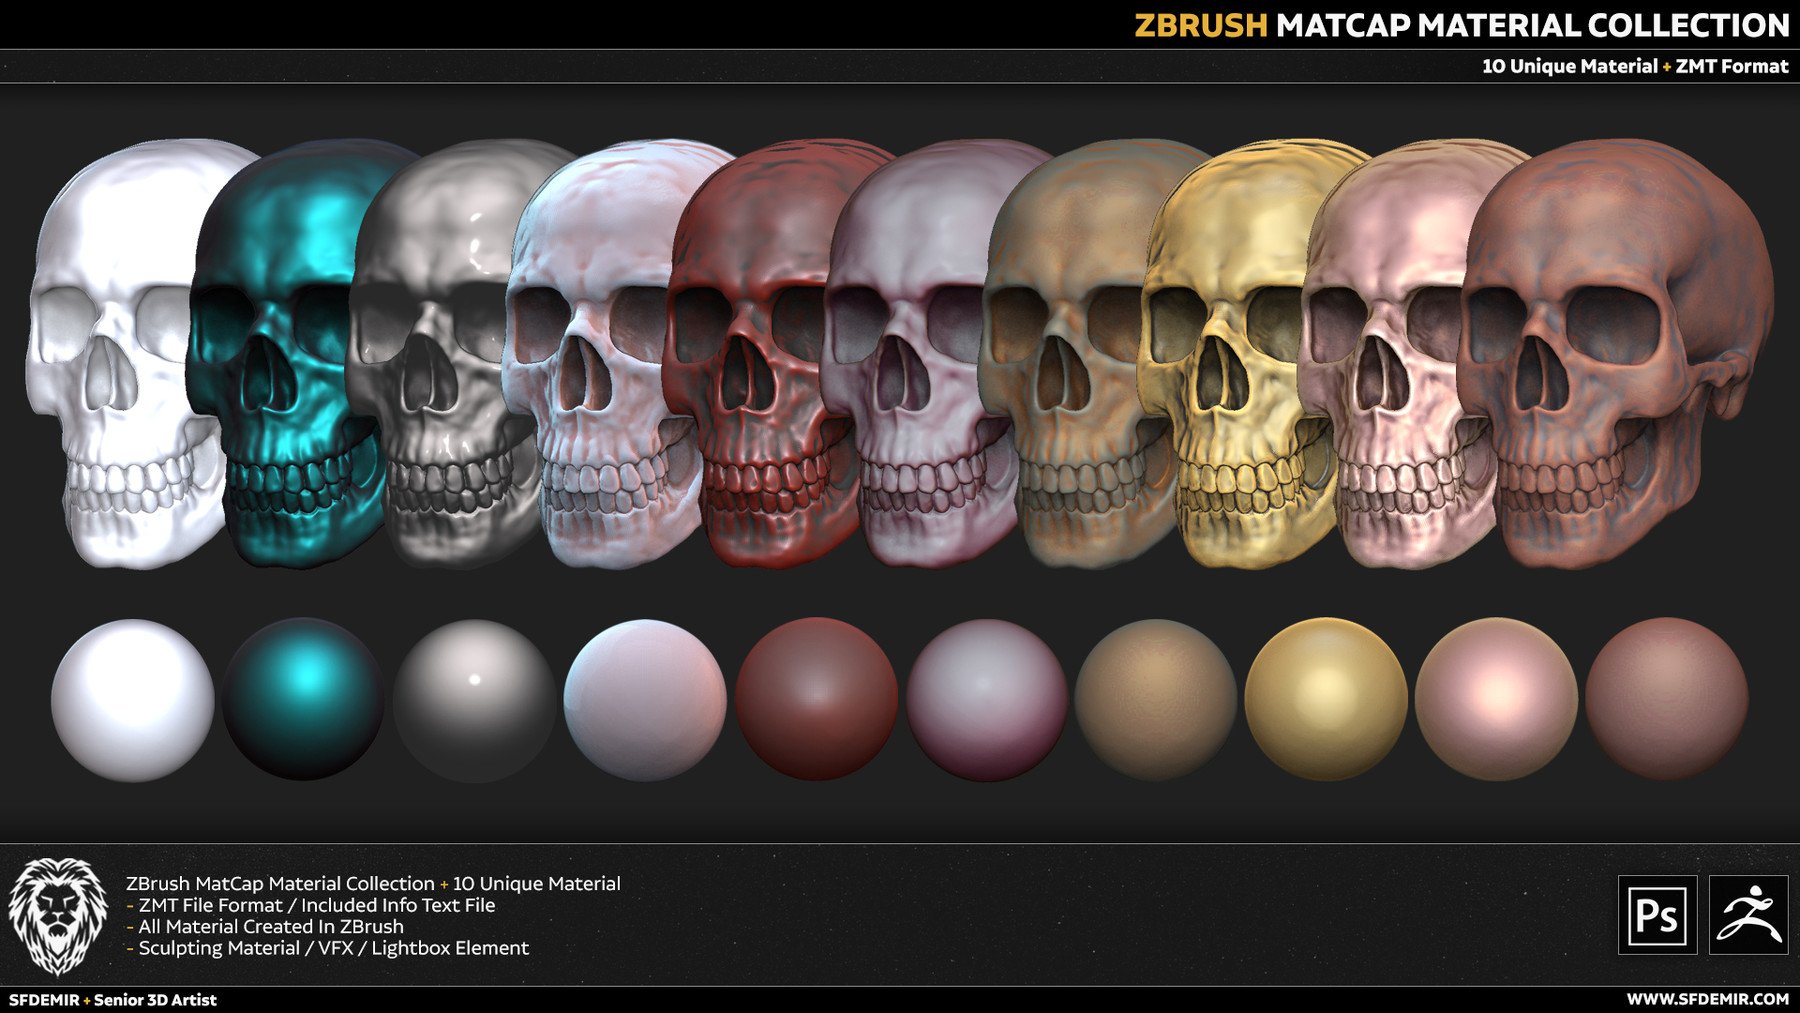 Material collection. Zbrush Matcap. Zbrush материалы. Zbrush materials. Matcap materials.